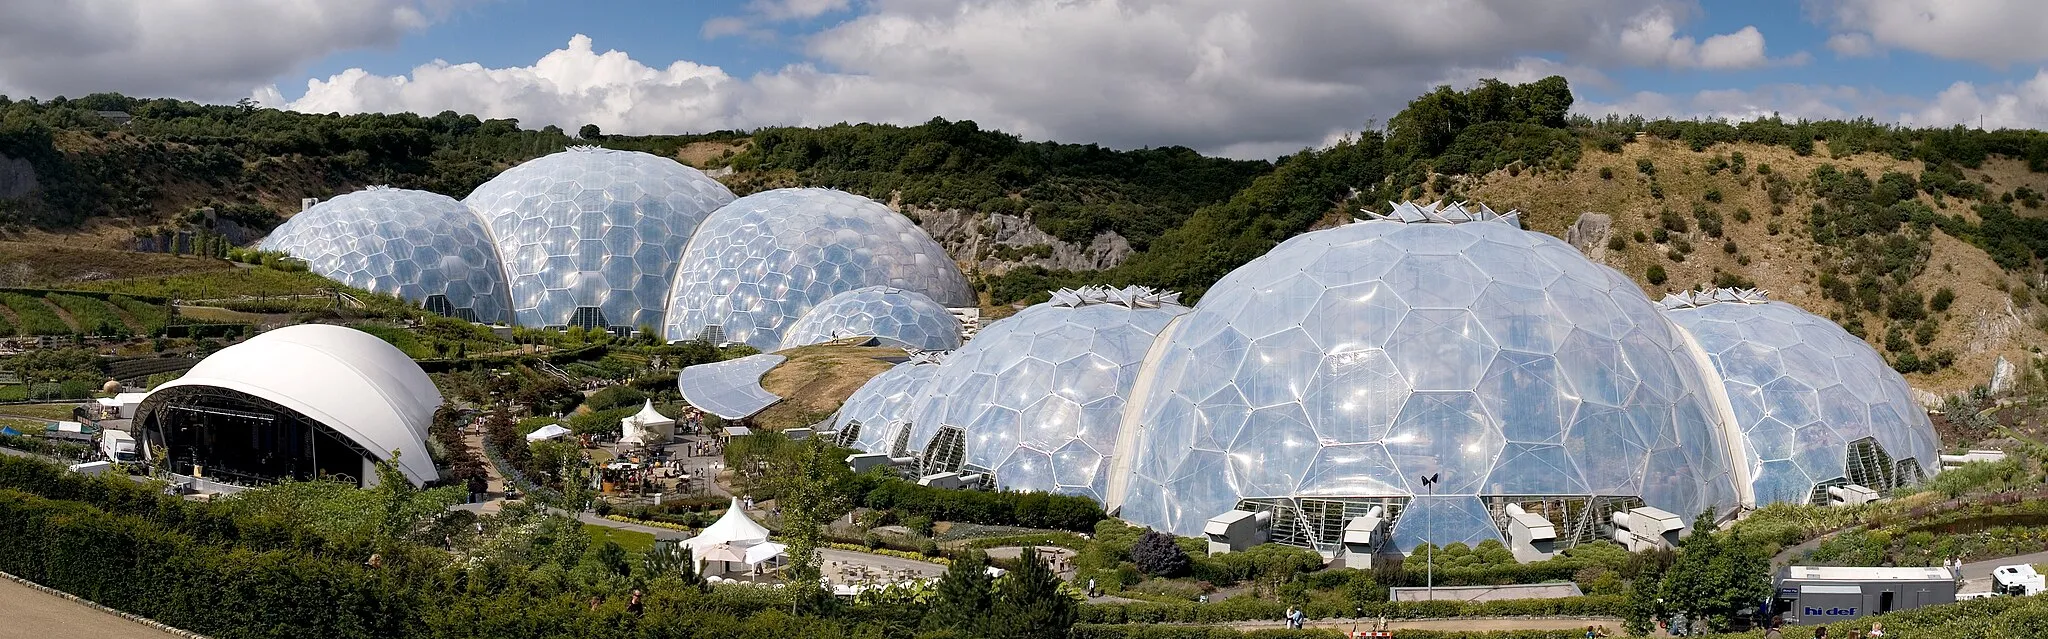 Photo showing: Panoramic view of the geodesic dome structures of the Eden Project. The Eden Project is a large-scale environmental complex near St Austell, Cornwall, England, United Kingdom. The project was conceived by Tim Smit and has quickly become one of the most popular visitor attractions in the United Kingdom. The complex includes two giant, transparent domes made of ETFE cushions, each emulating a natural biome, that house plant species from around the world. The first emulates a tropical environment, the other a warm temperate, mediterranean environment. The project took 2½ years to construct and opened to the public in March 2001.